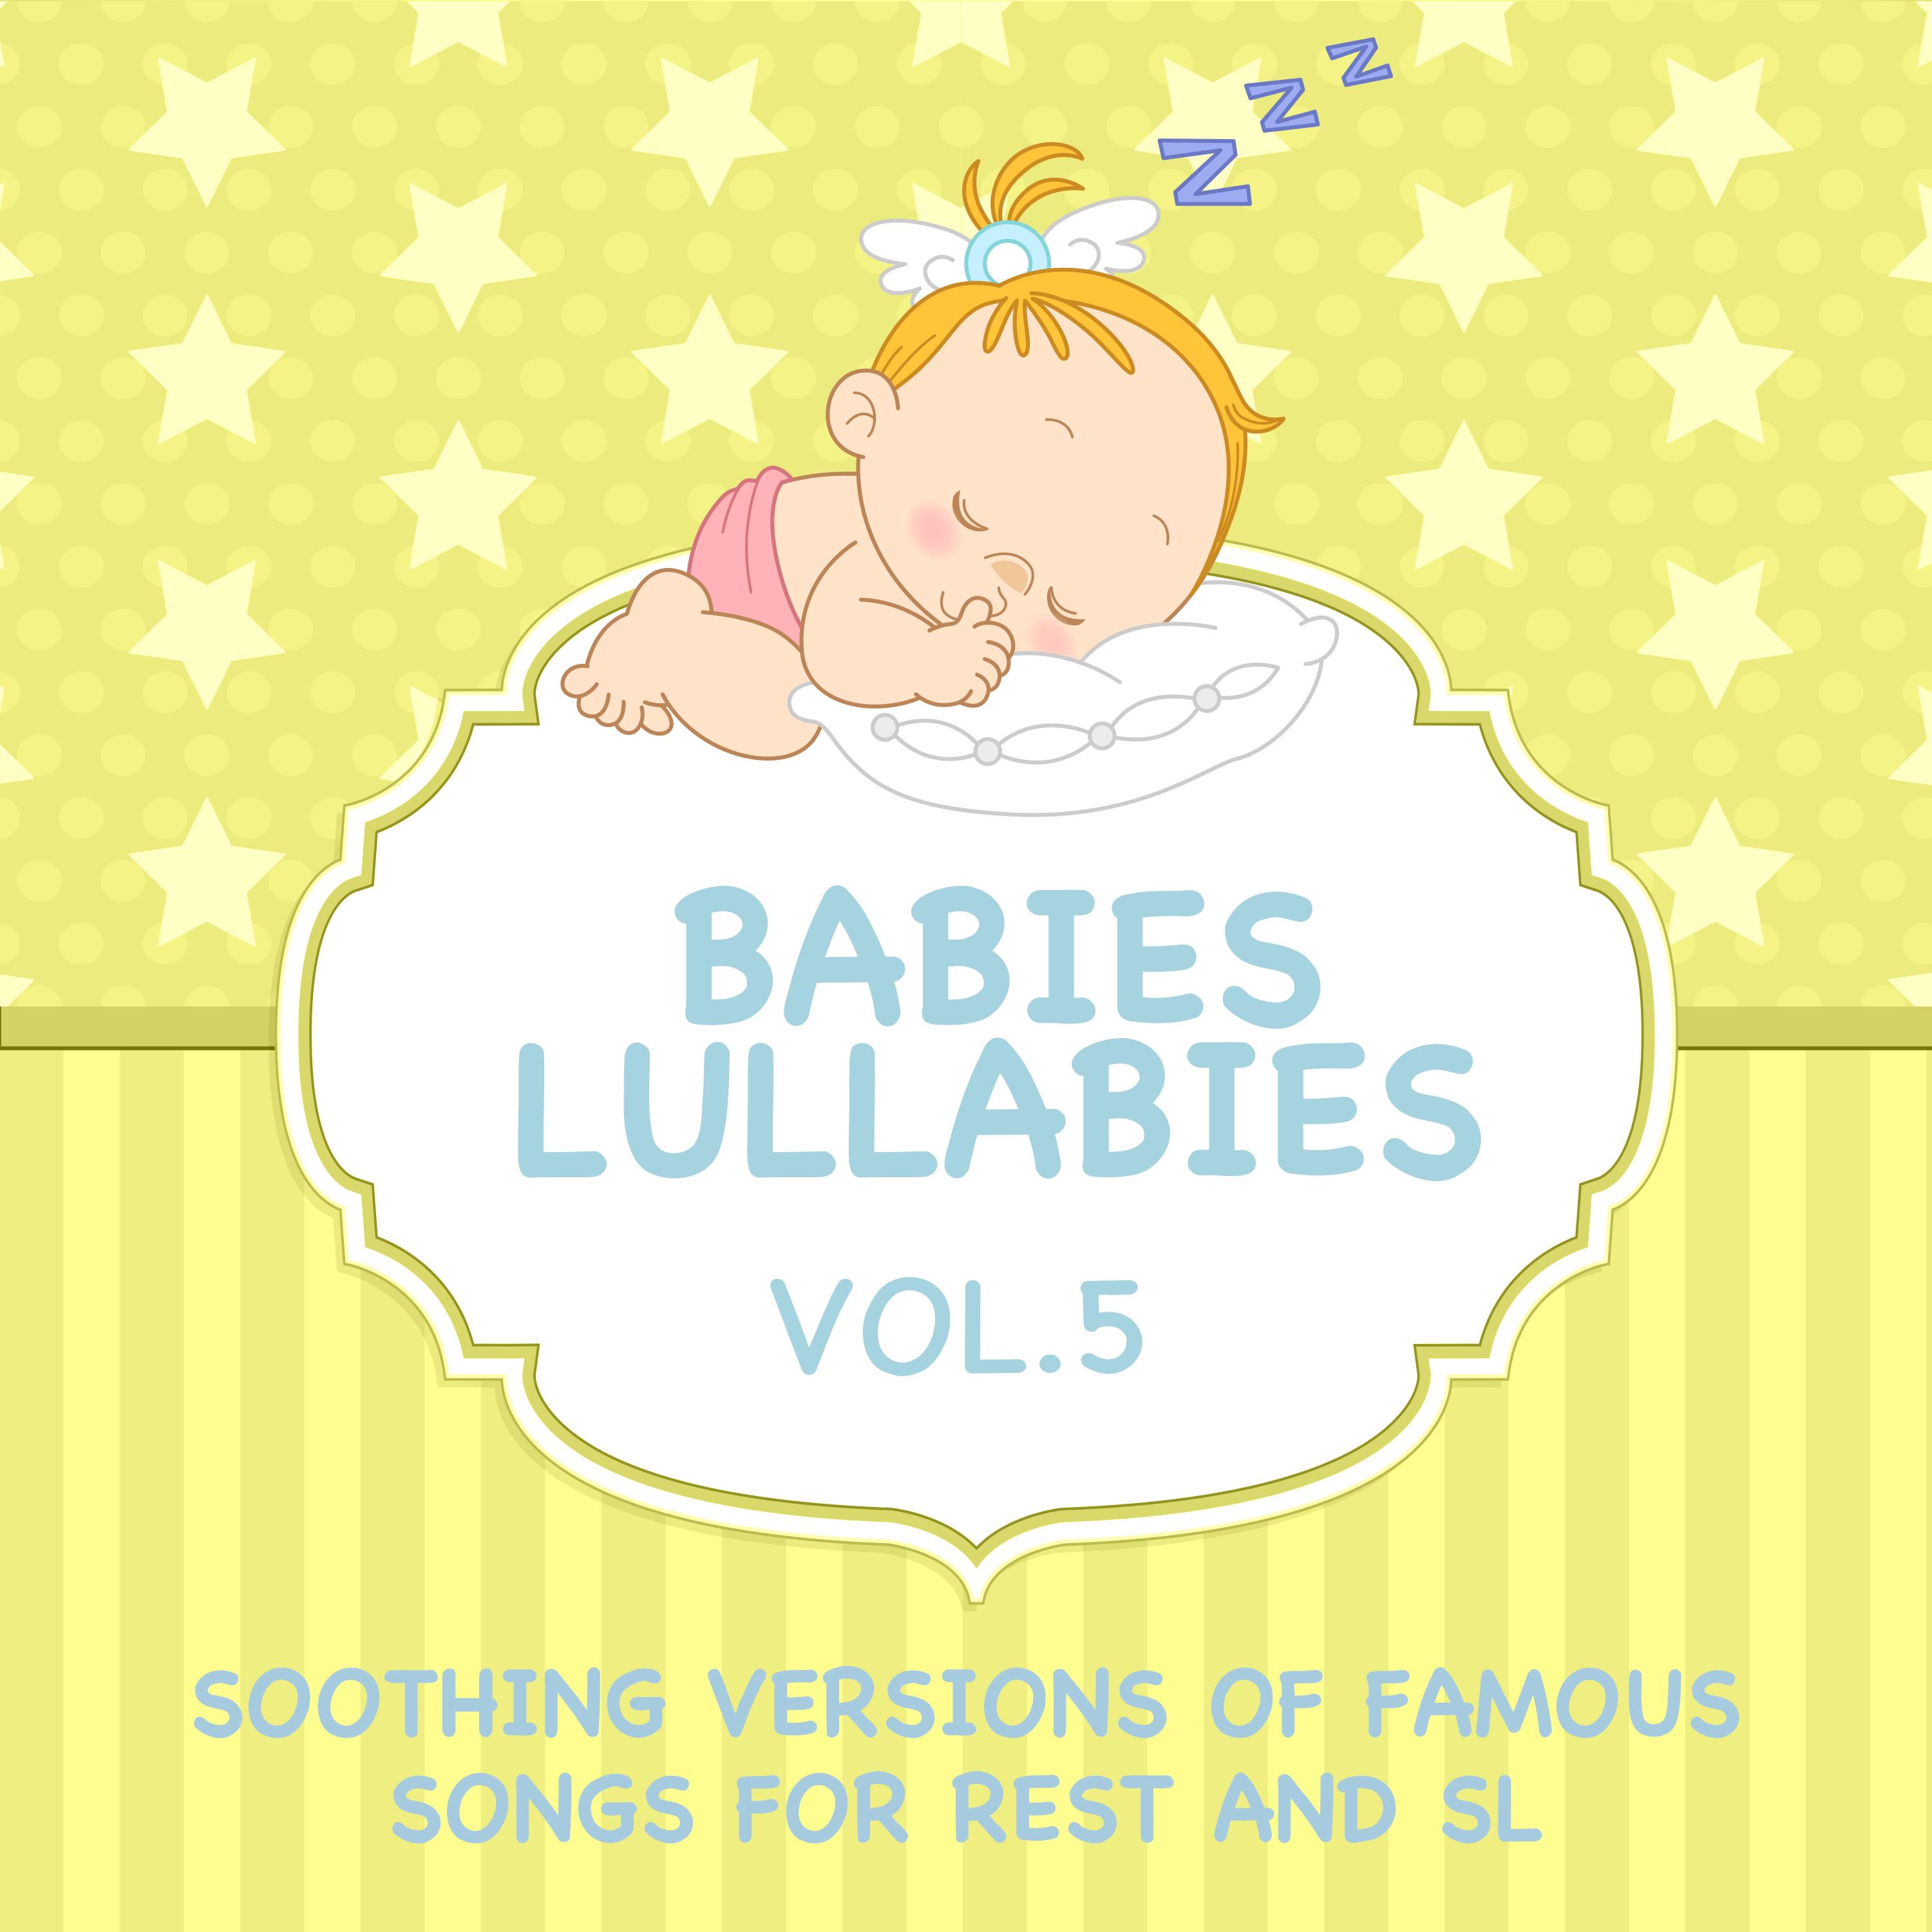 Babies Lullabies - Soothing Versions of Famous Songs for Rest and Sleep, Vol. 5